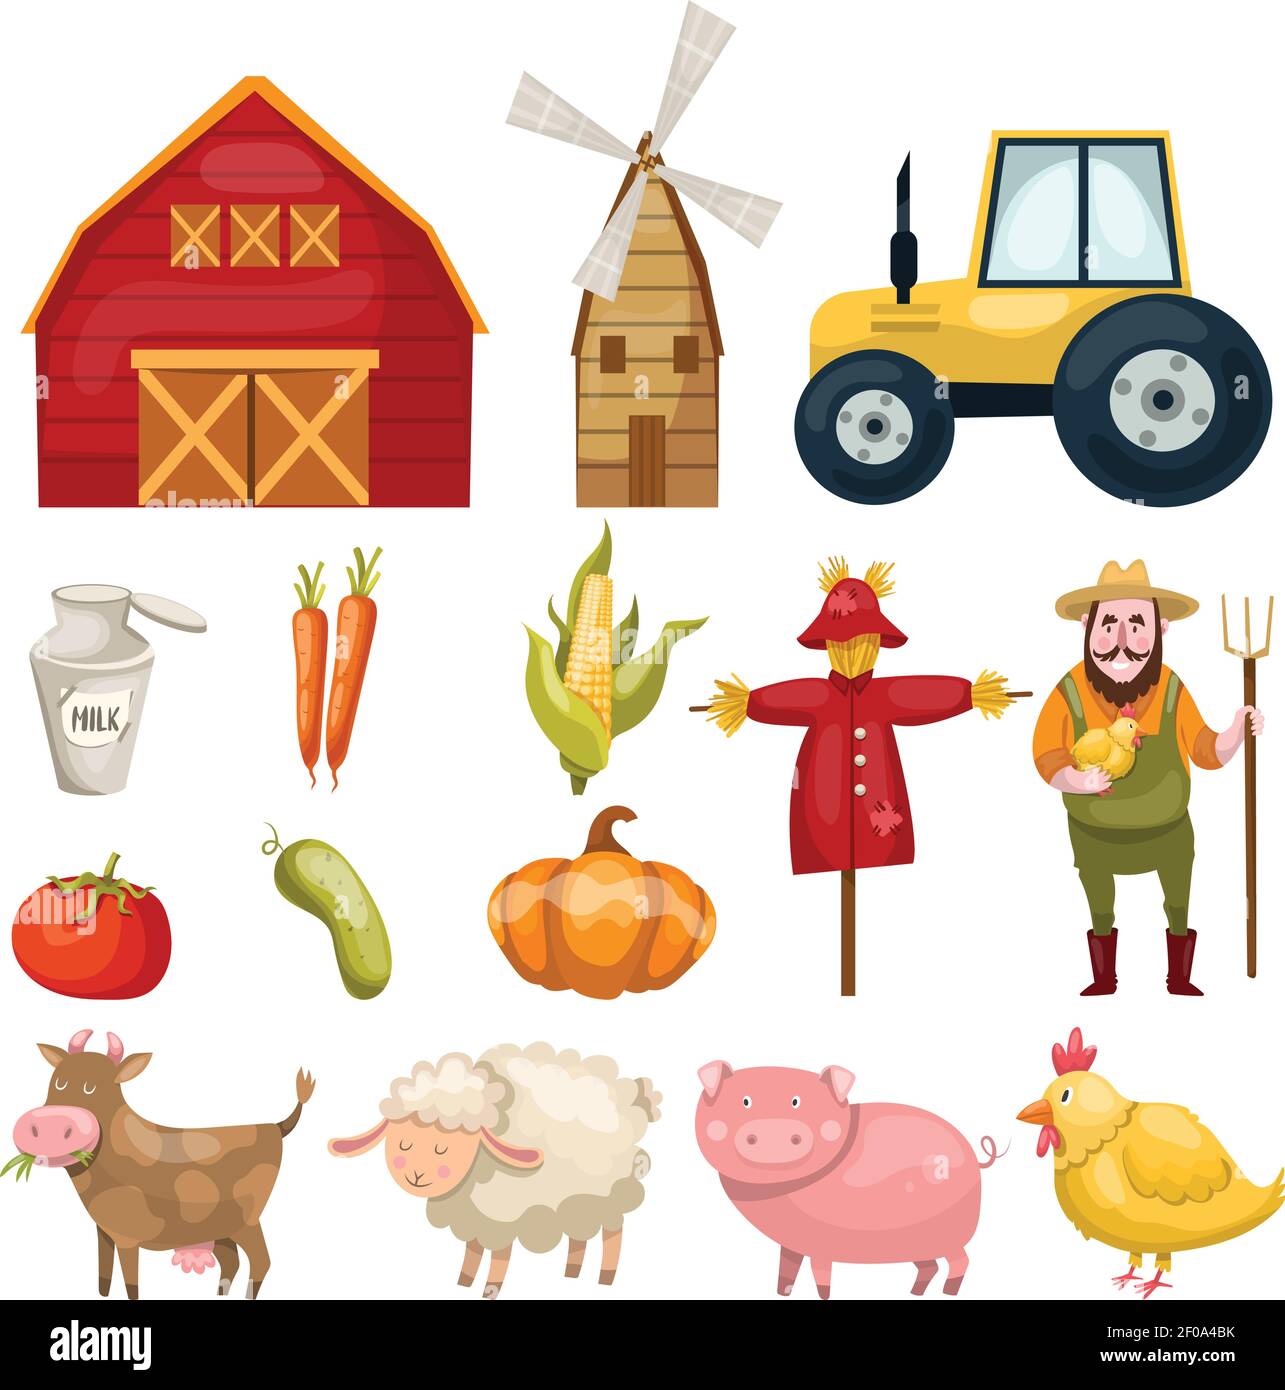 Set with plenty of colorful isolated farm symbols buildings animals characters natural food and organic vegetables vector illustration Stock Vector